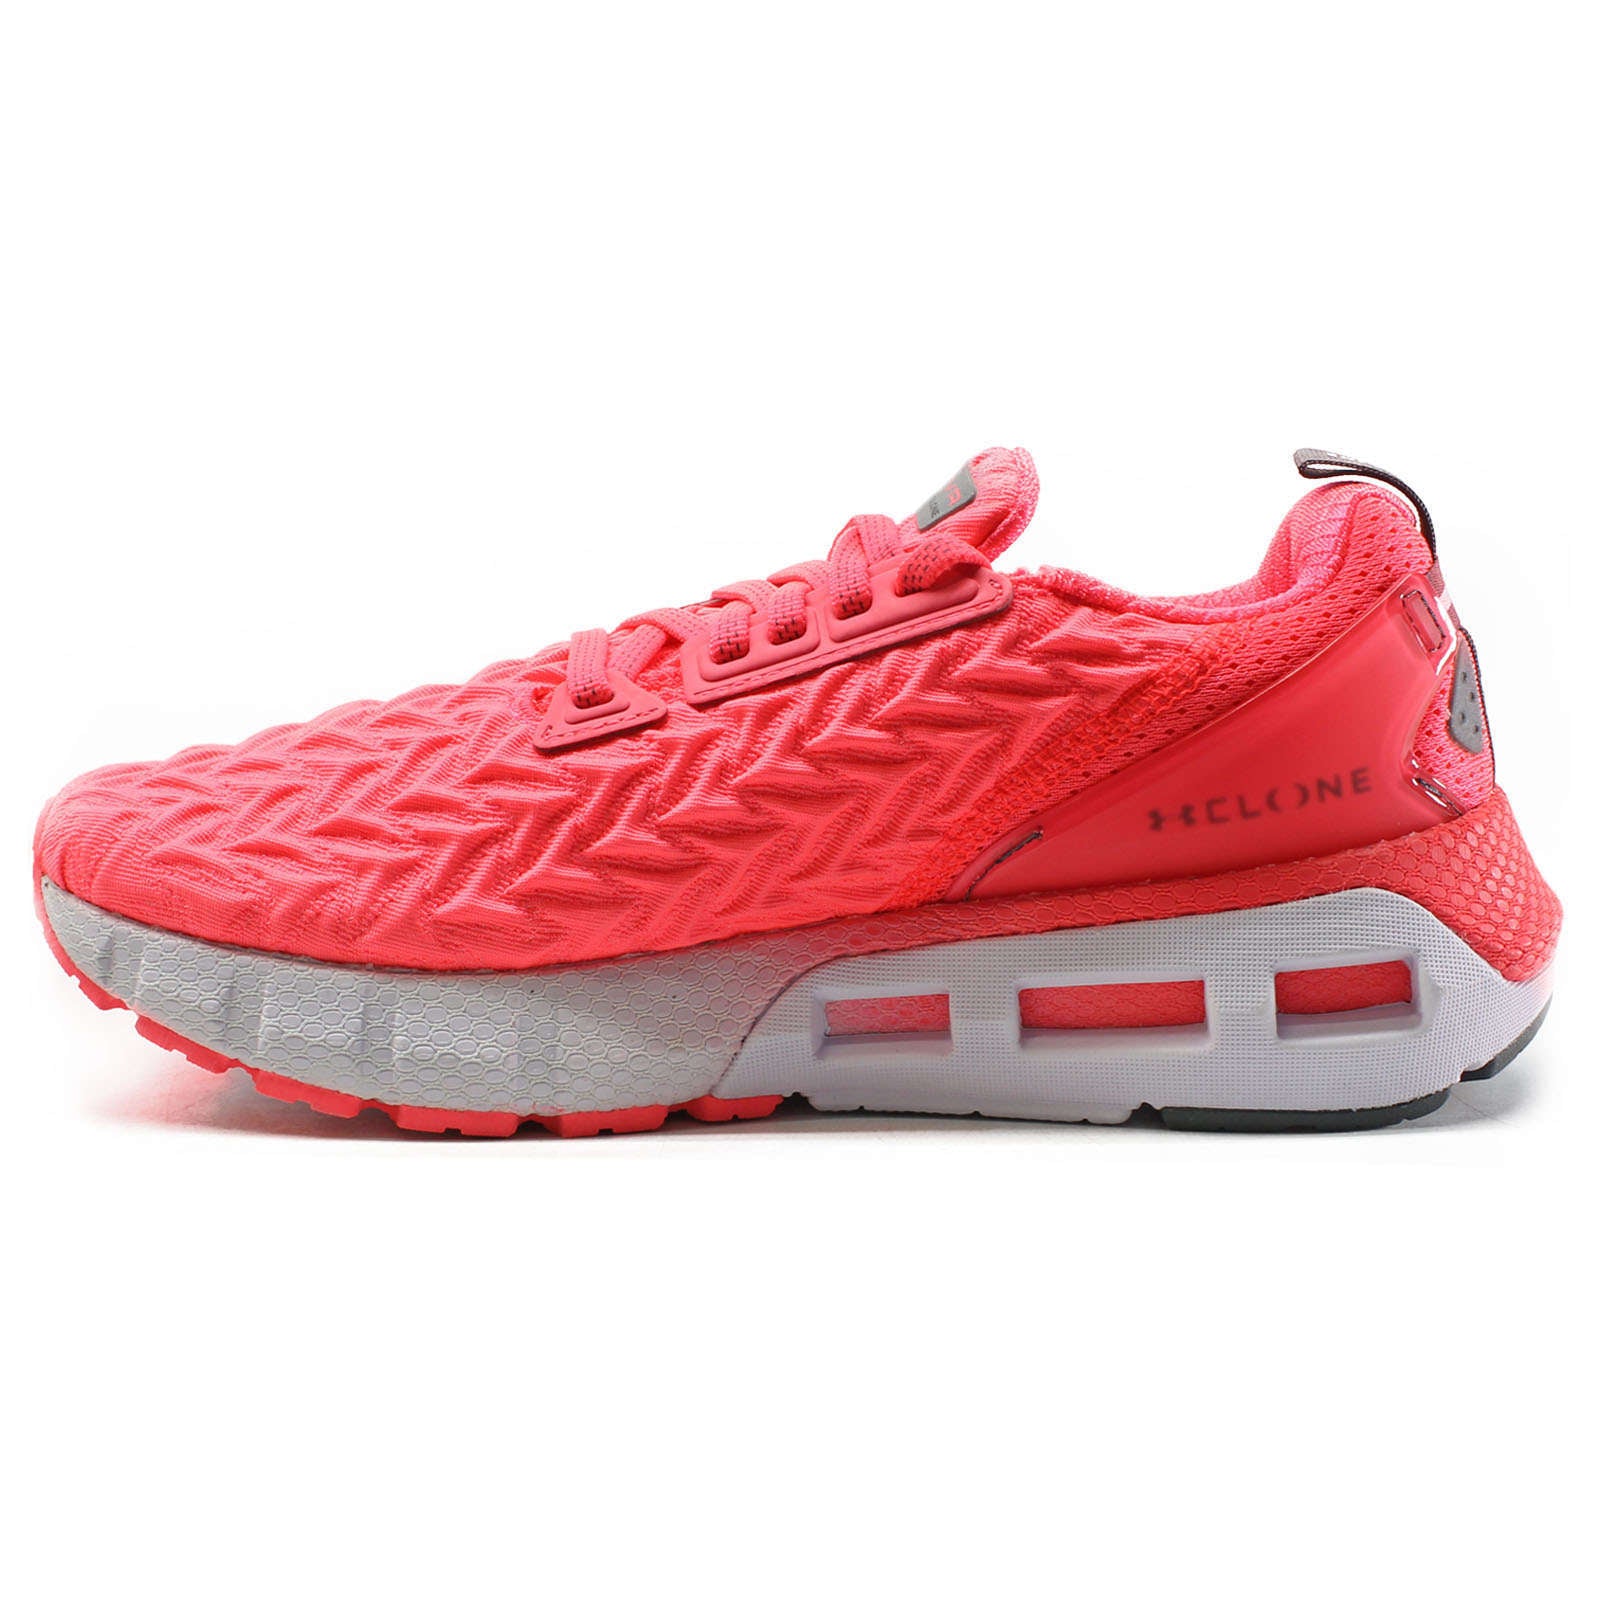 Under Armour HOVR Mega 2 Clone Synthetic Textile Women's Low-Top Trainers#color_pink white